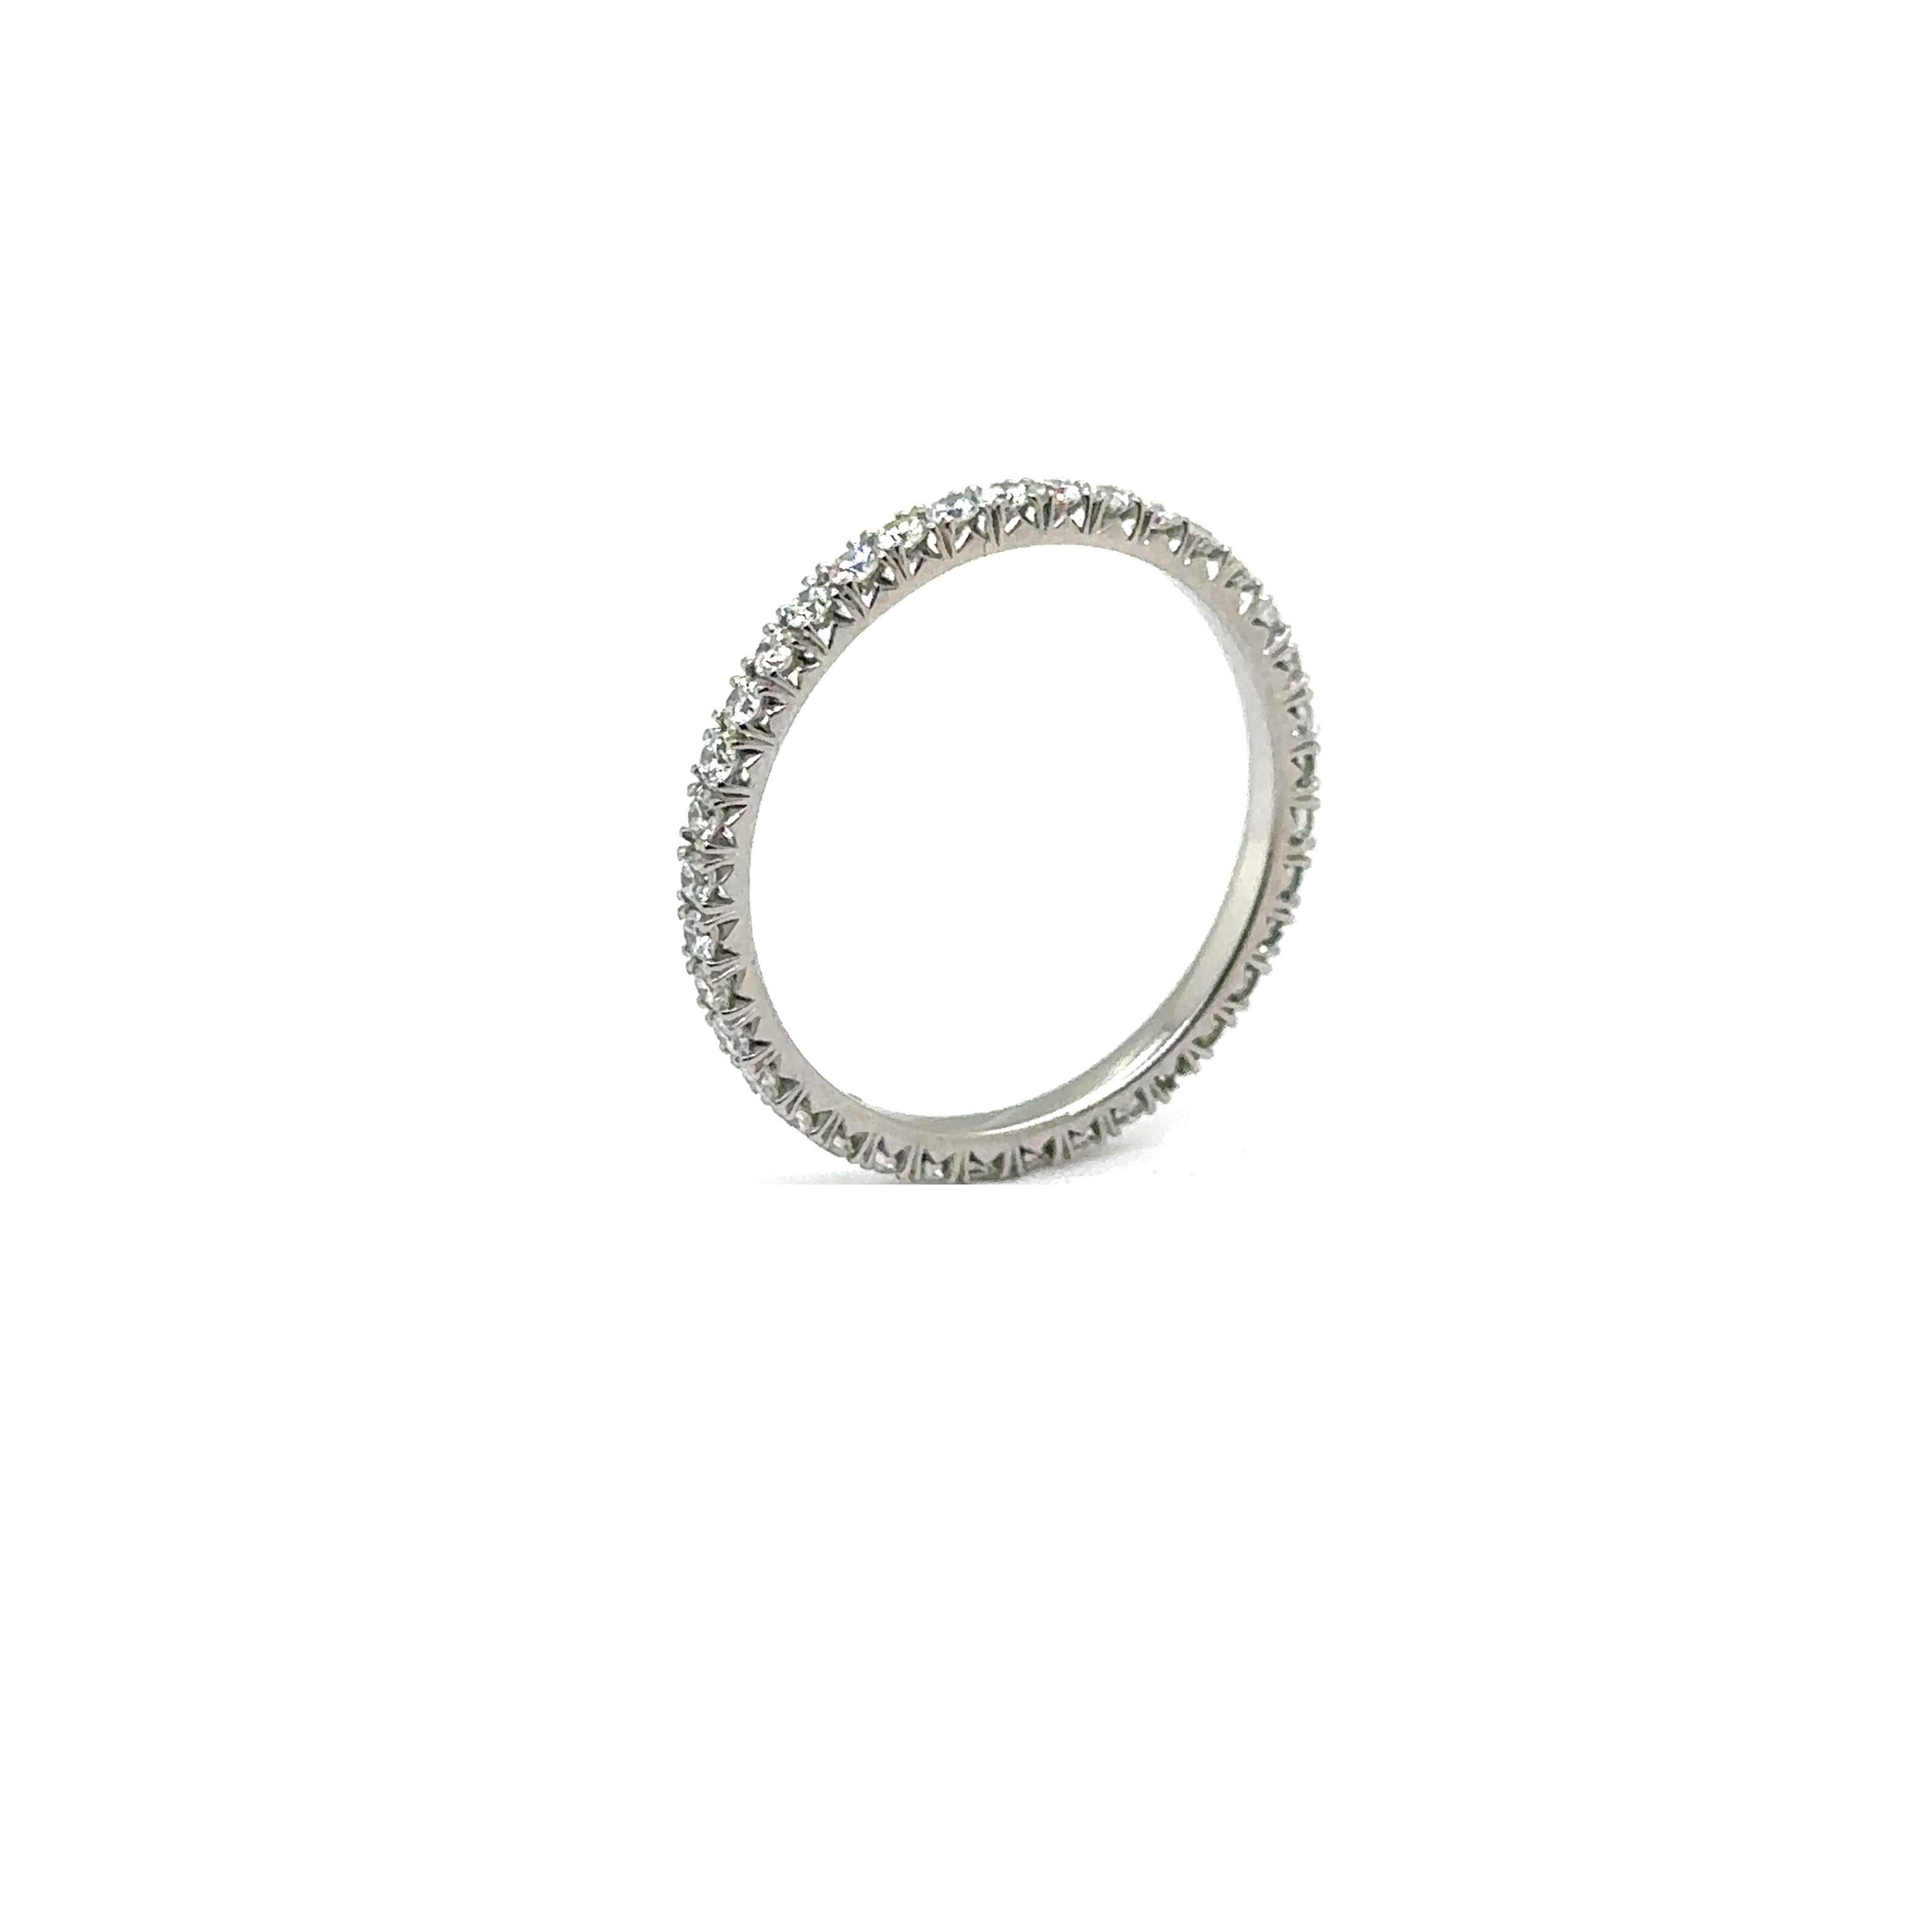 WB-1.7-33 - PLATINUM WEDDING BAND with 0.56 CWT DIAMONDS For Sale 2